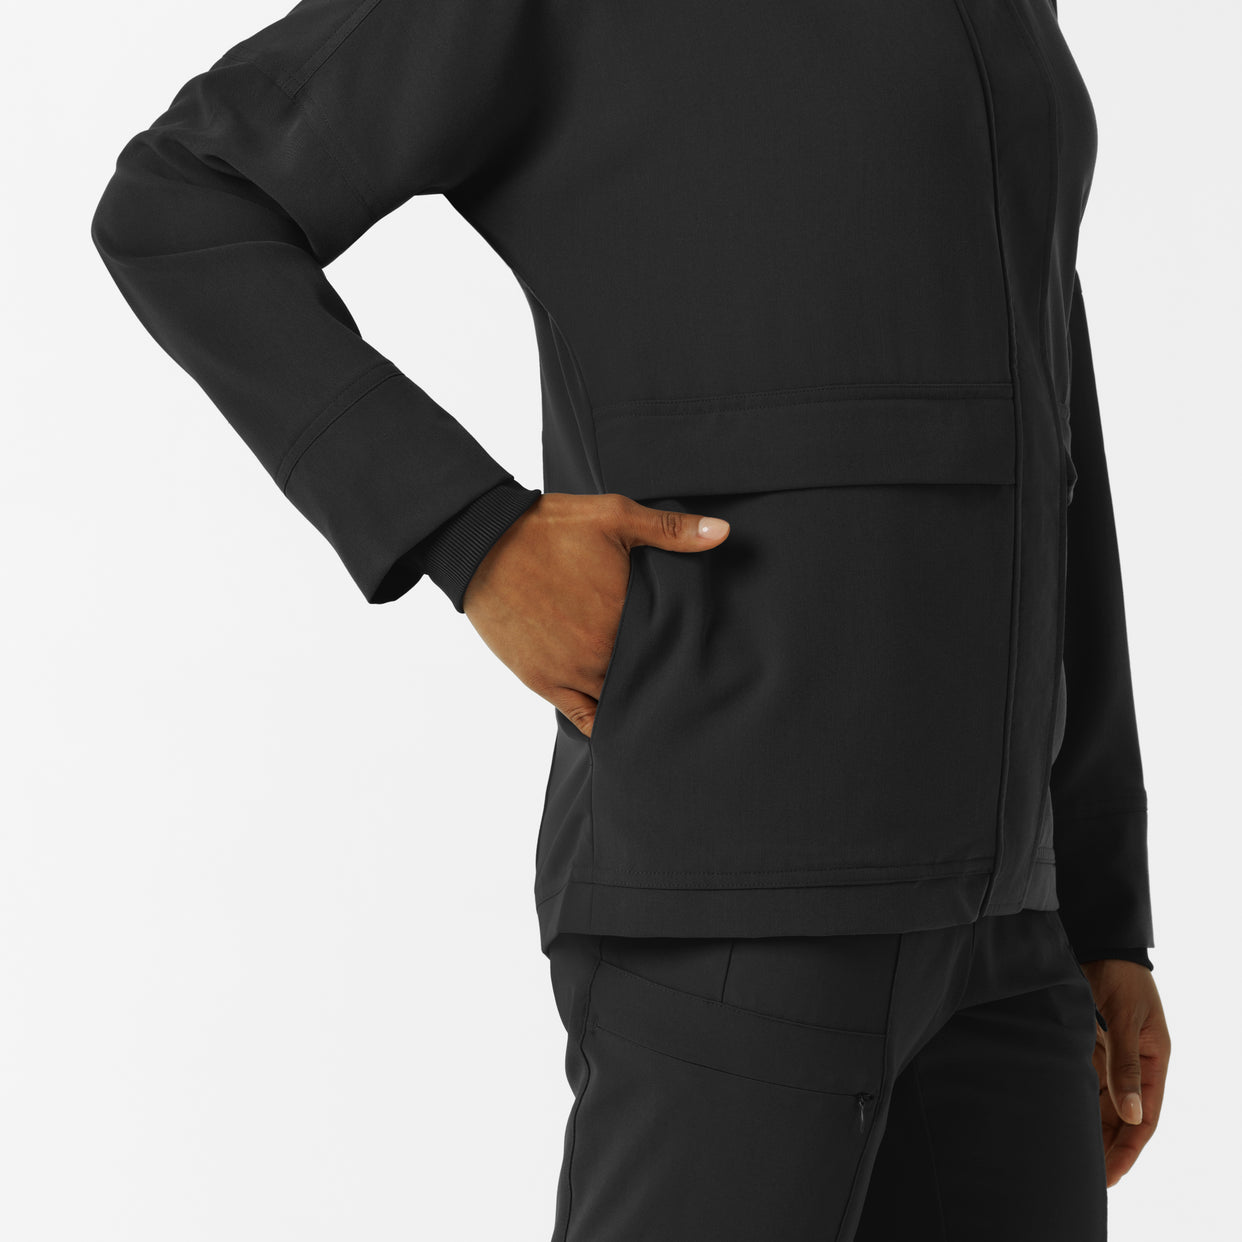 Knits and Layers Women's Germs Happen Packable Scrub Jacket Black back detail